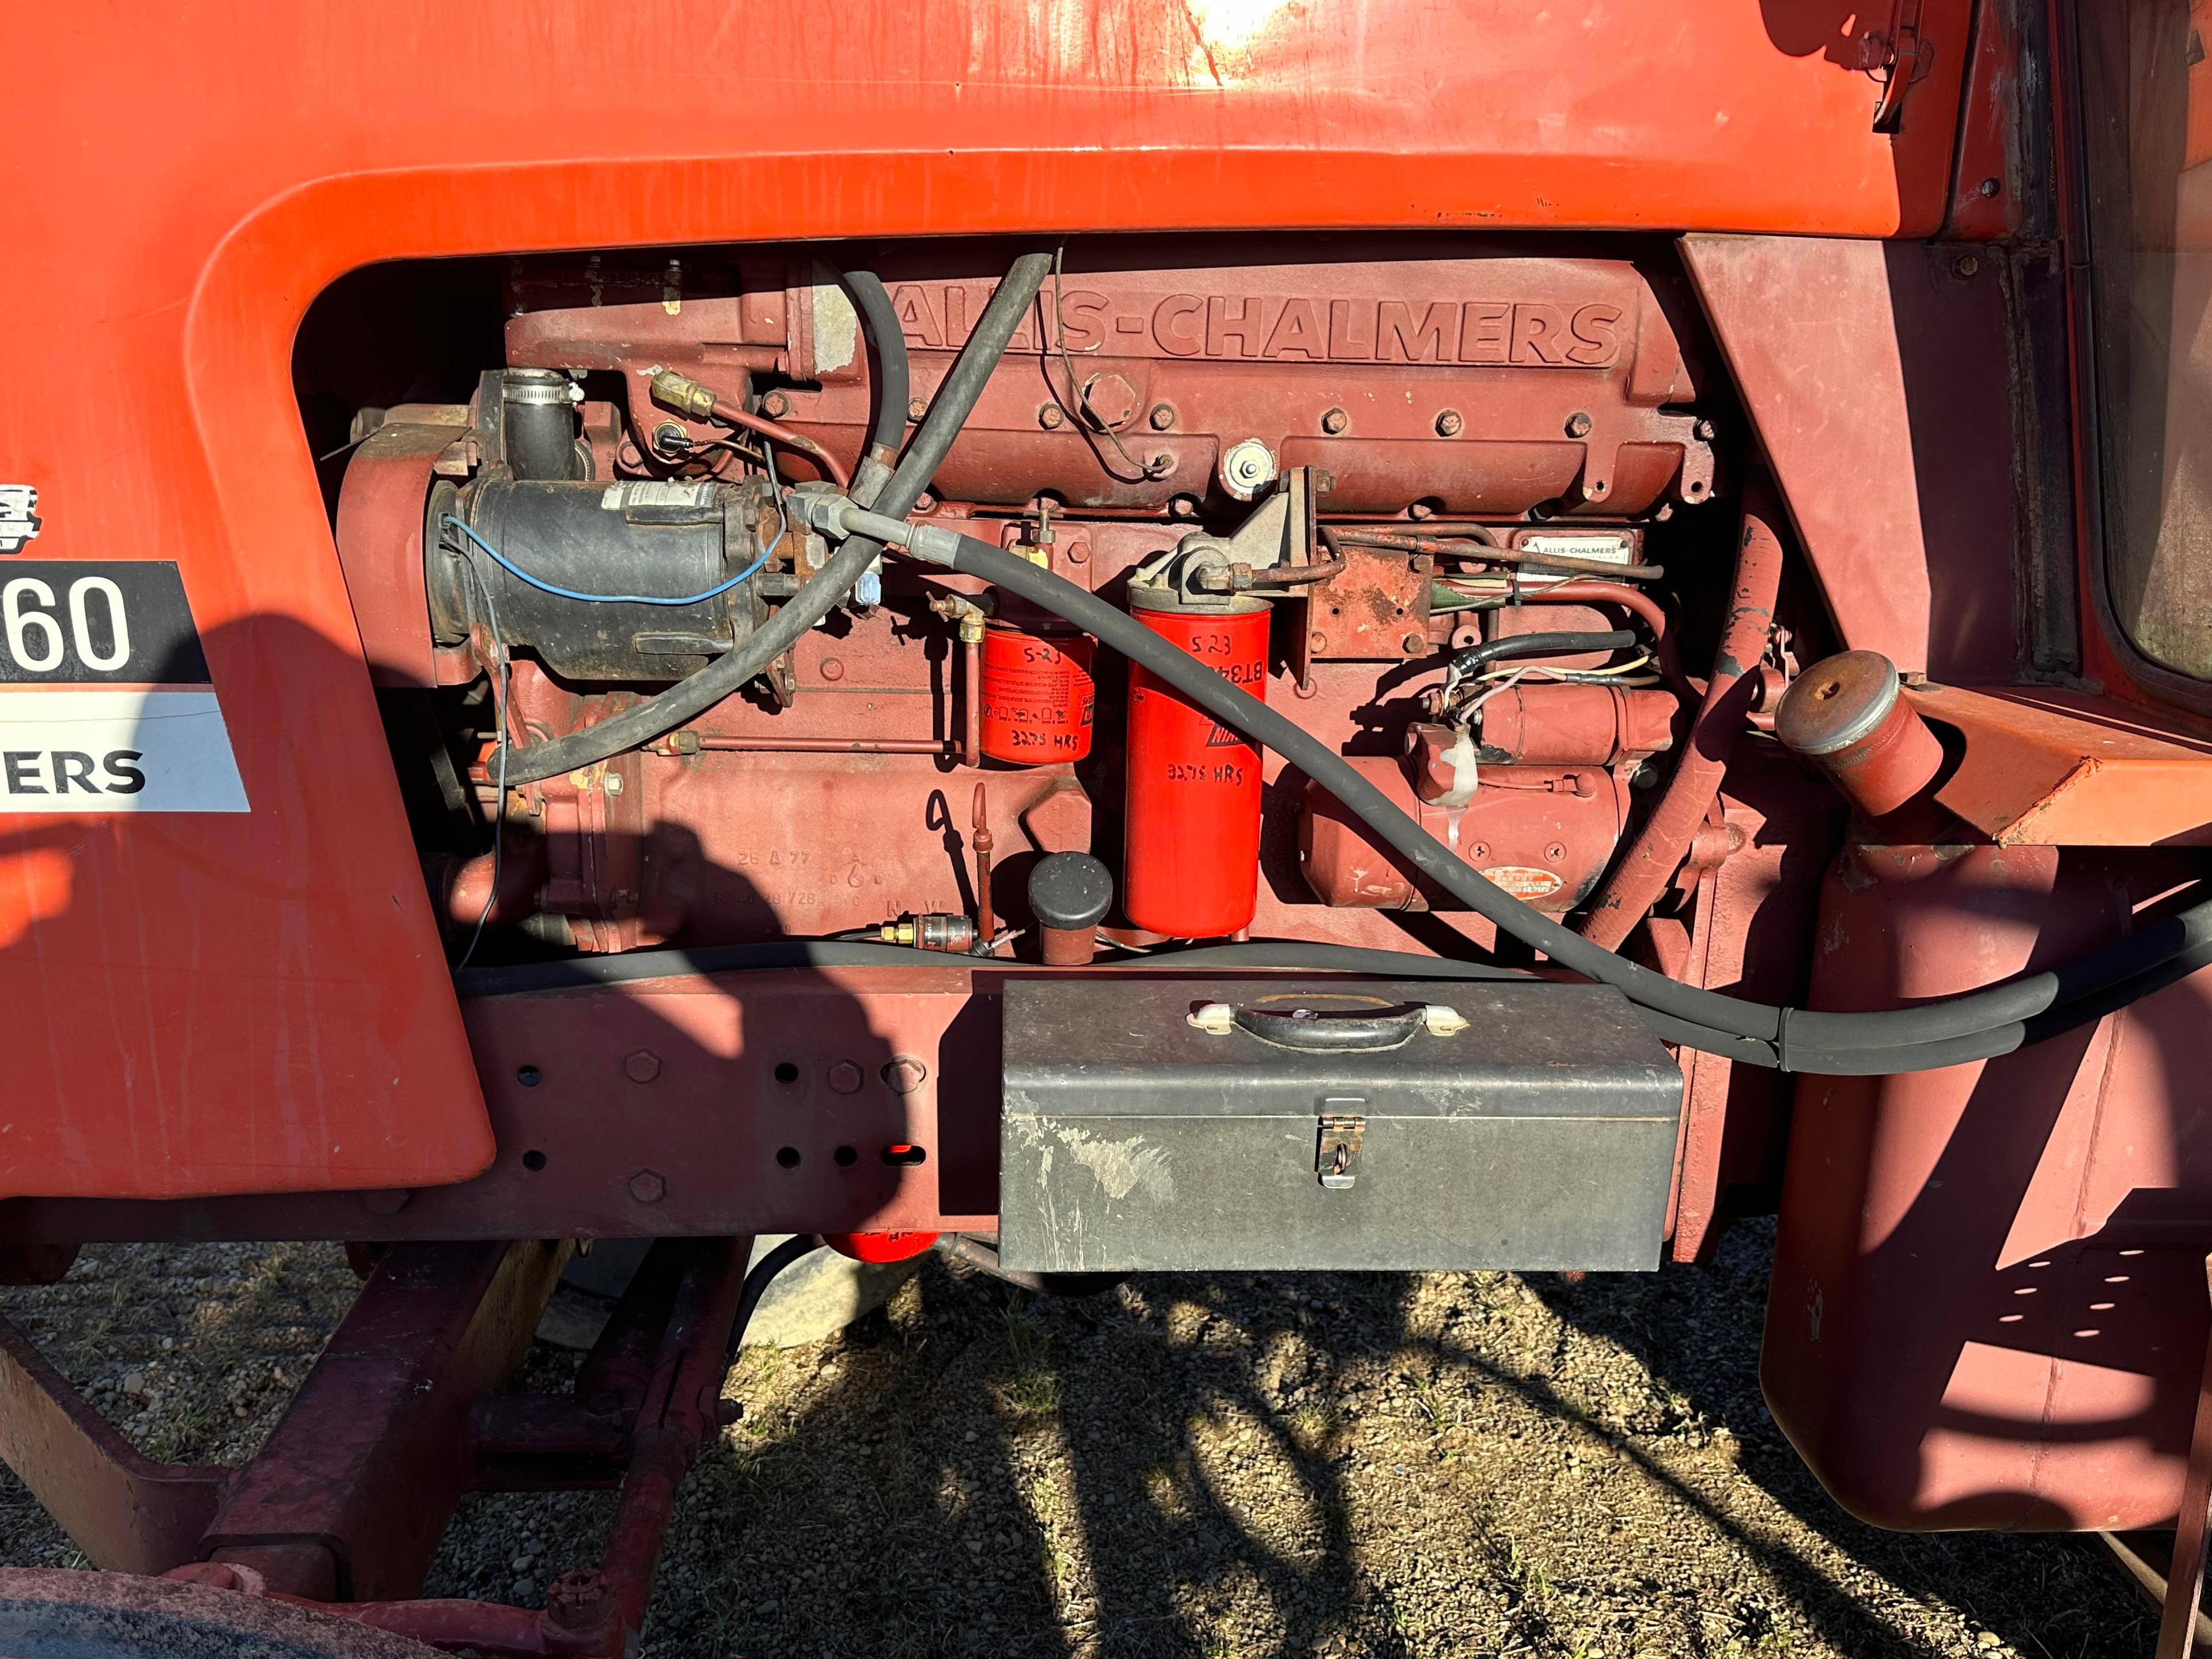 Allis Chalmers 7060  2WD Cab Tractor